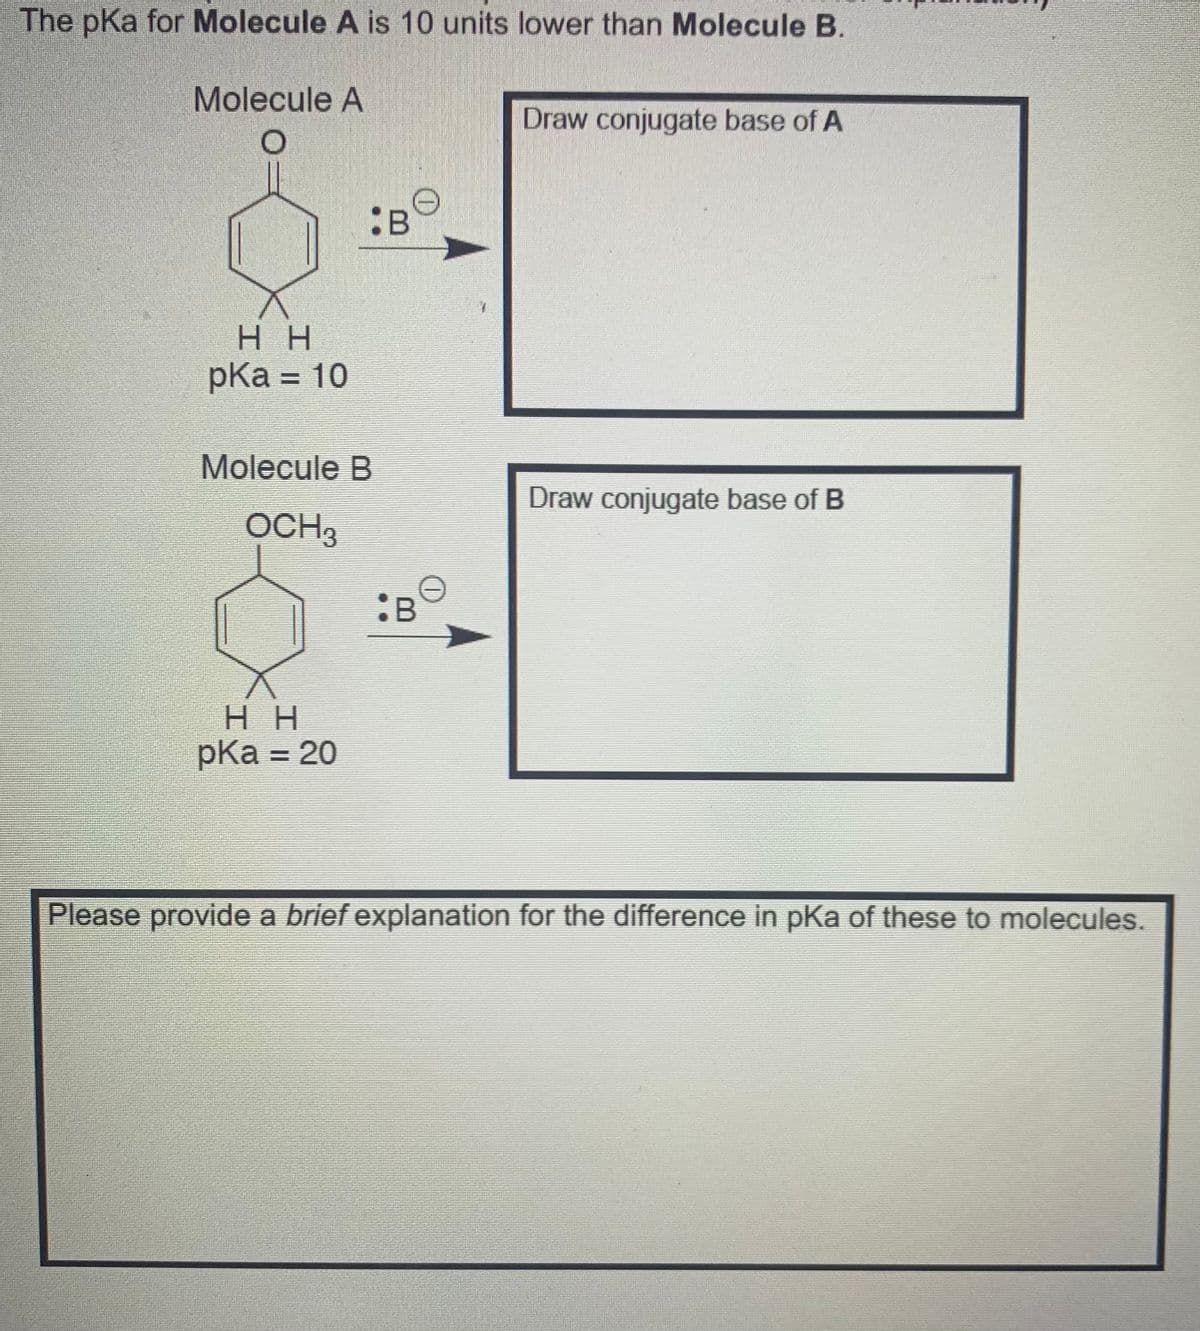 The pKa for Molecule A is 10 units lower than Molecule B.
Molecule A
Draw conjugate base of A
:B
H H
pKa = 10
Molecule B
Draw conjugate base of B
OCH3
:B
H H
pКa 3 20
Please provide a brief explanation for the difference in pKa of these to molecules.
